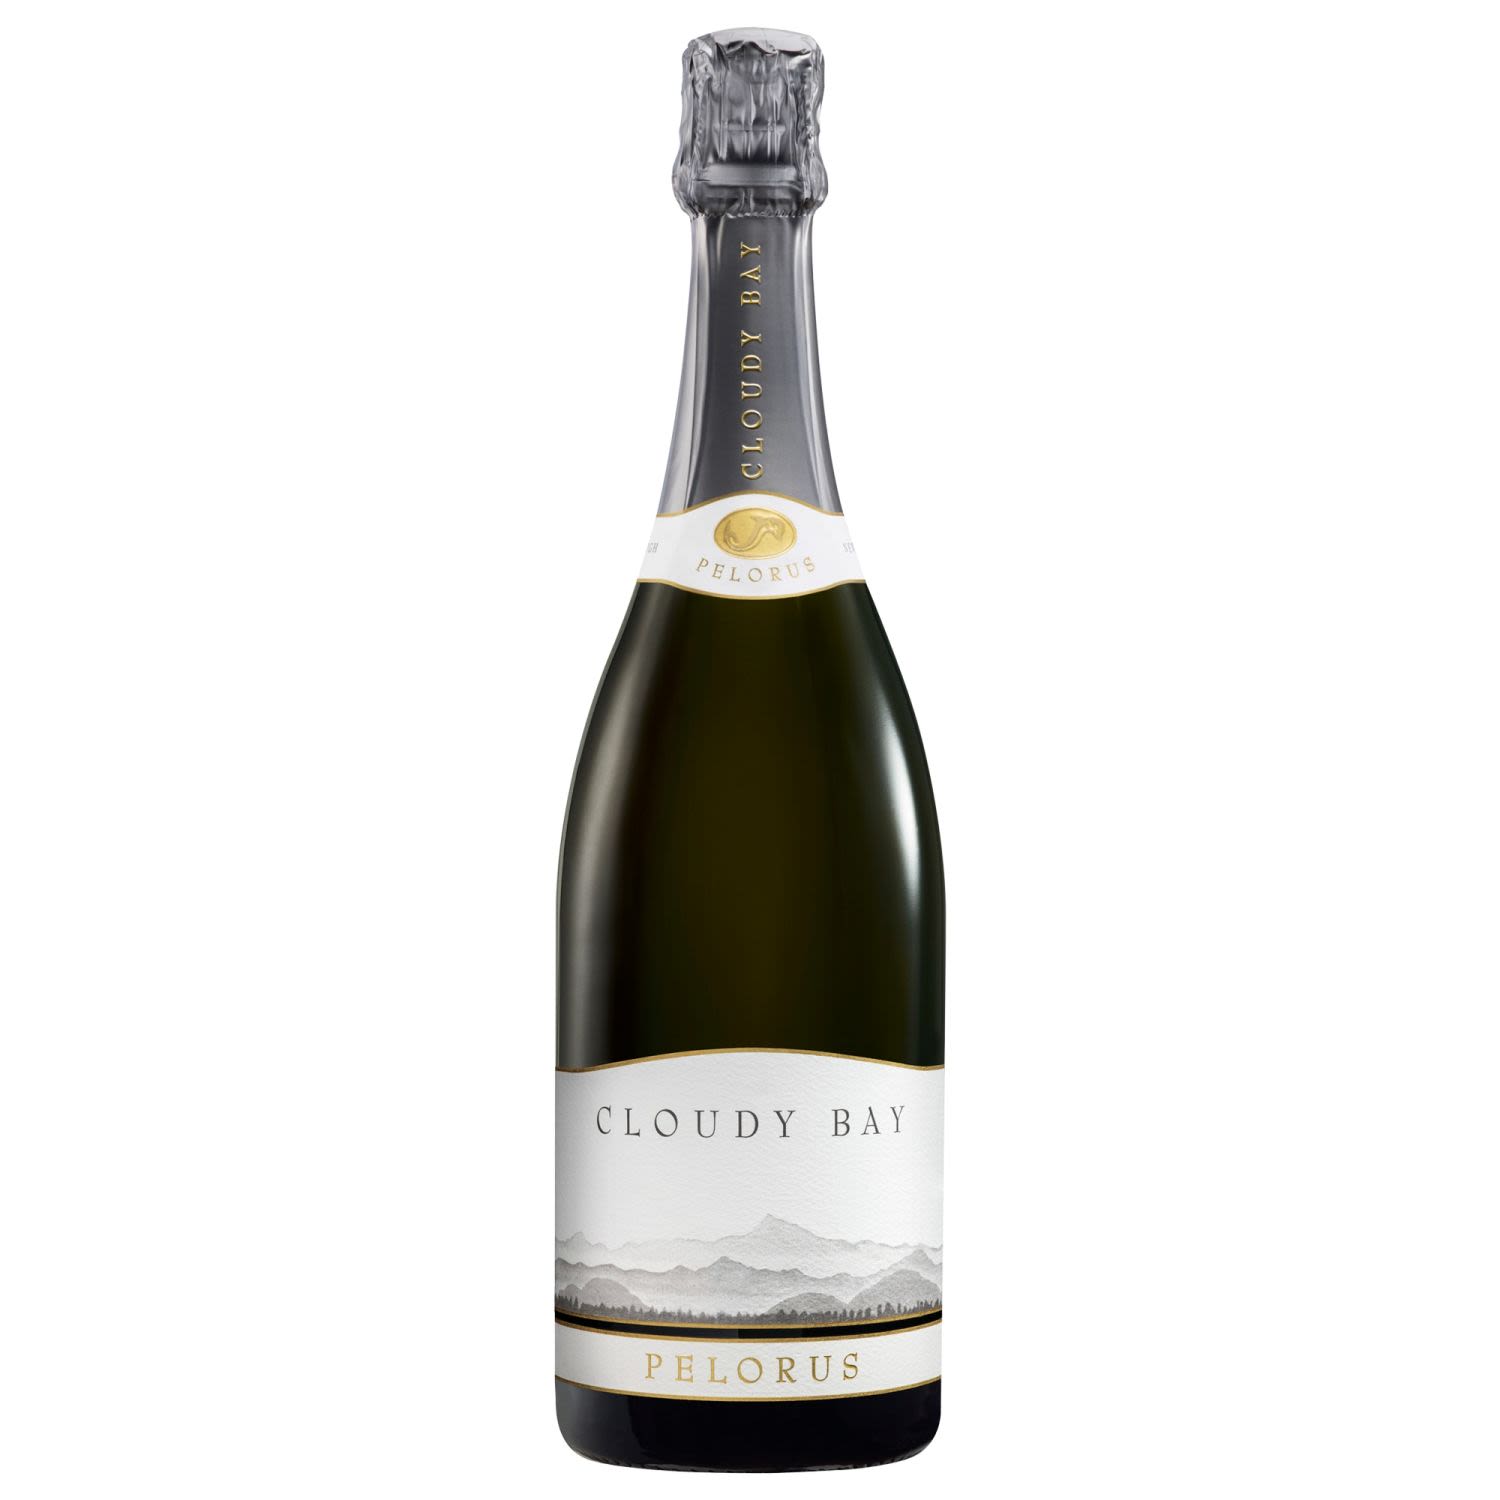 Established in 1985, Cloudy Bay was one of the first five wine makers to venture into Marlborough. Pelorus embodies the crispy sophistication of a sparkling wine: subtly combining fresh and fruity Chardonnay notes with savoury hints of Pinot Noir.<br /> <br />Alcohol Volume: 12.50%<br /><br />Pack Format: Bottle<br /><br />Standard Drinks: 7.7</br /><br />Pack Type: Bottle<br /><br />Country of Origin: New Zealand<br /><br />Region: Marlborough<br /><br />Vintage: Non Vintage<br />